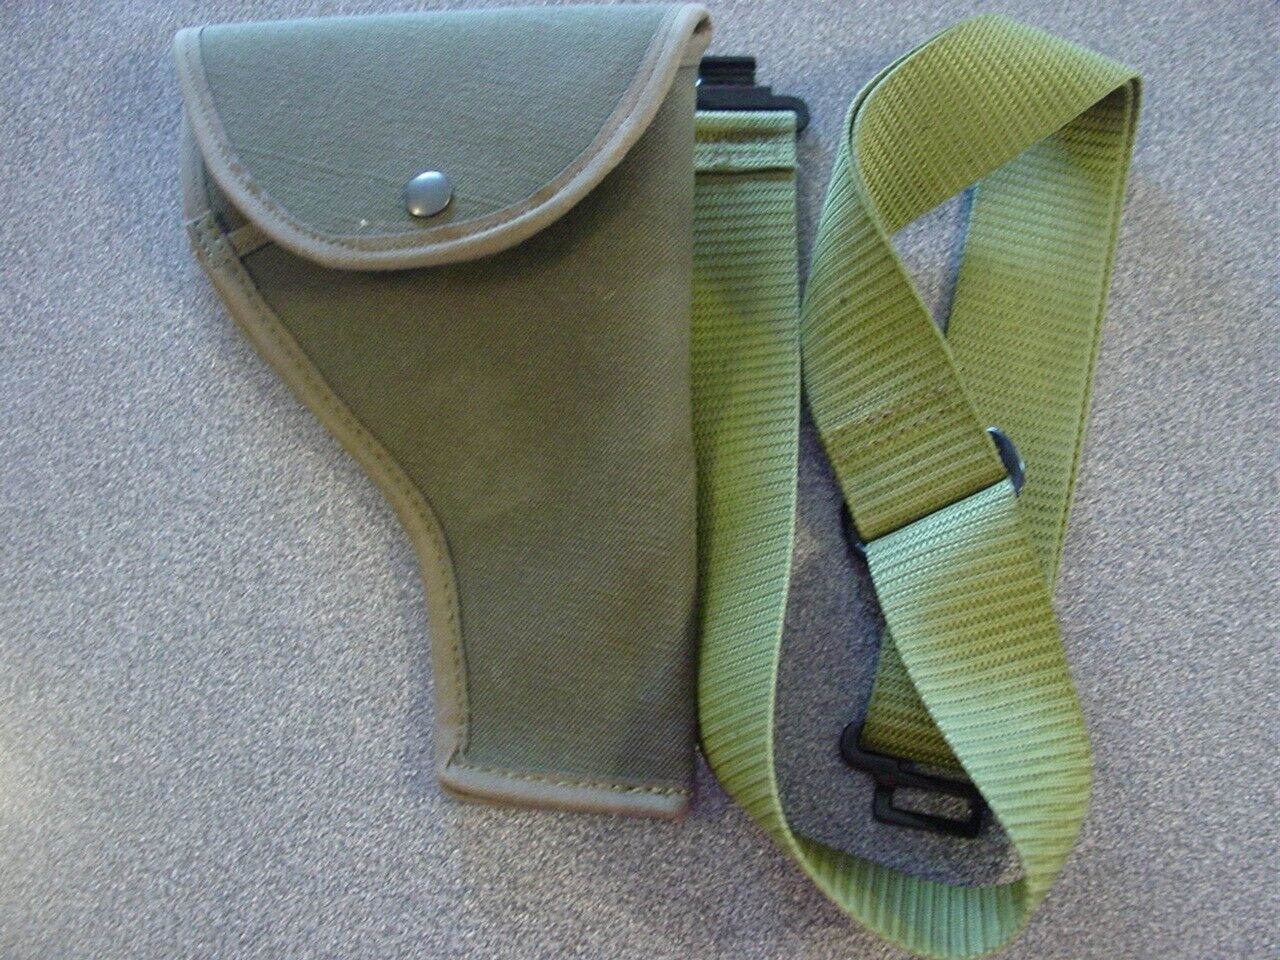 Vintage Military Pilots Solider Flare Gun Holster Israeli Issue? With straps